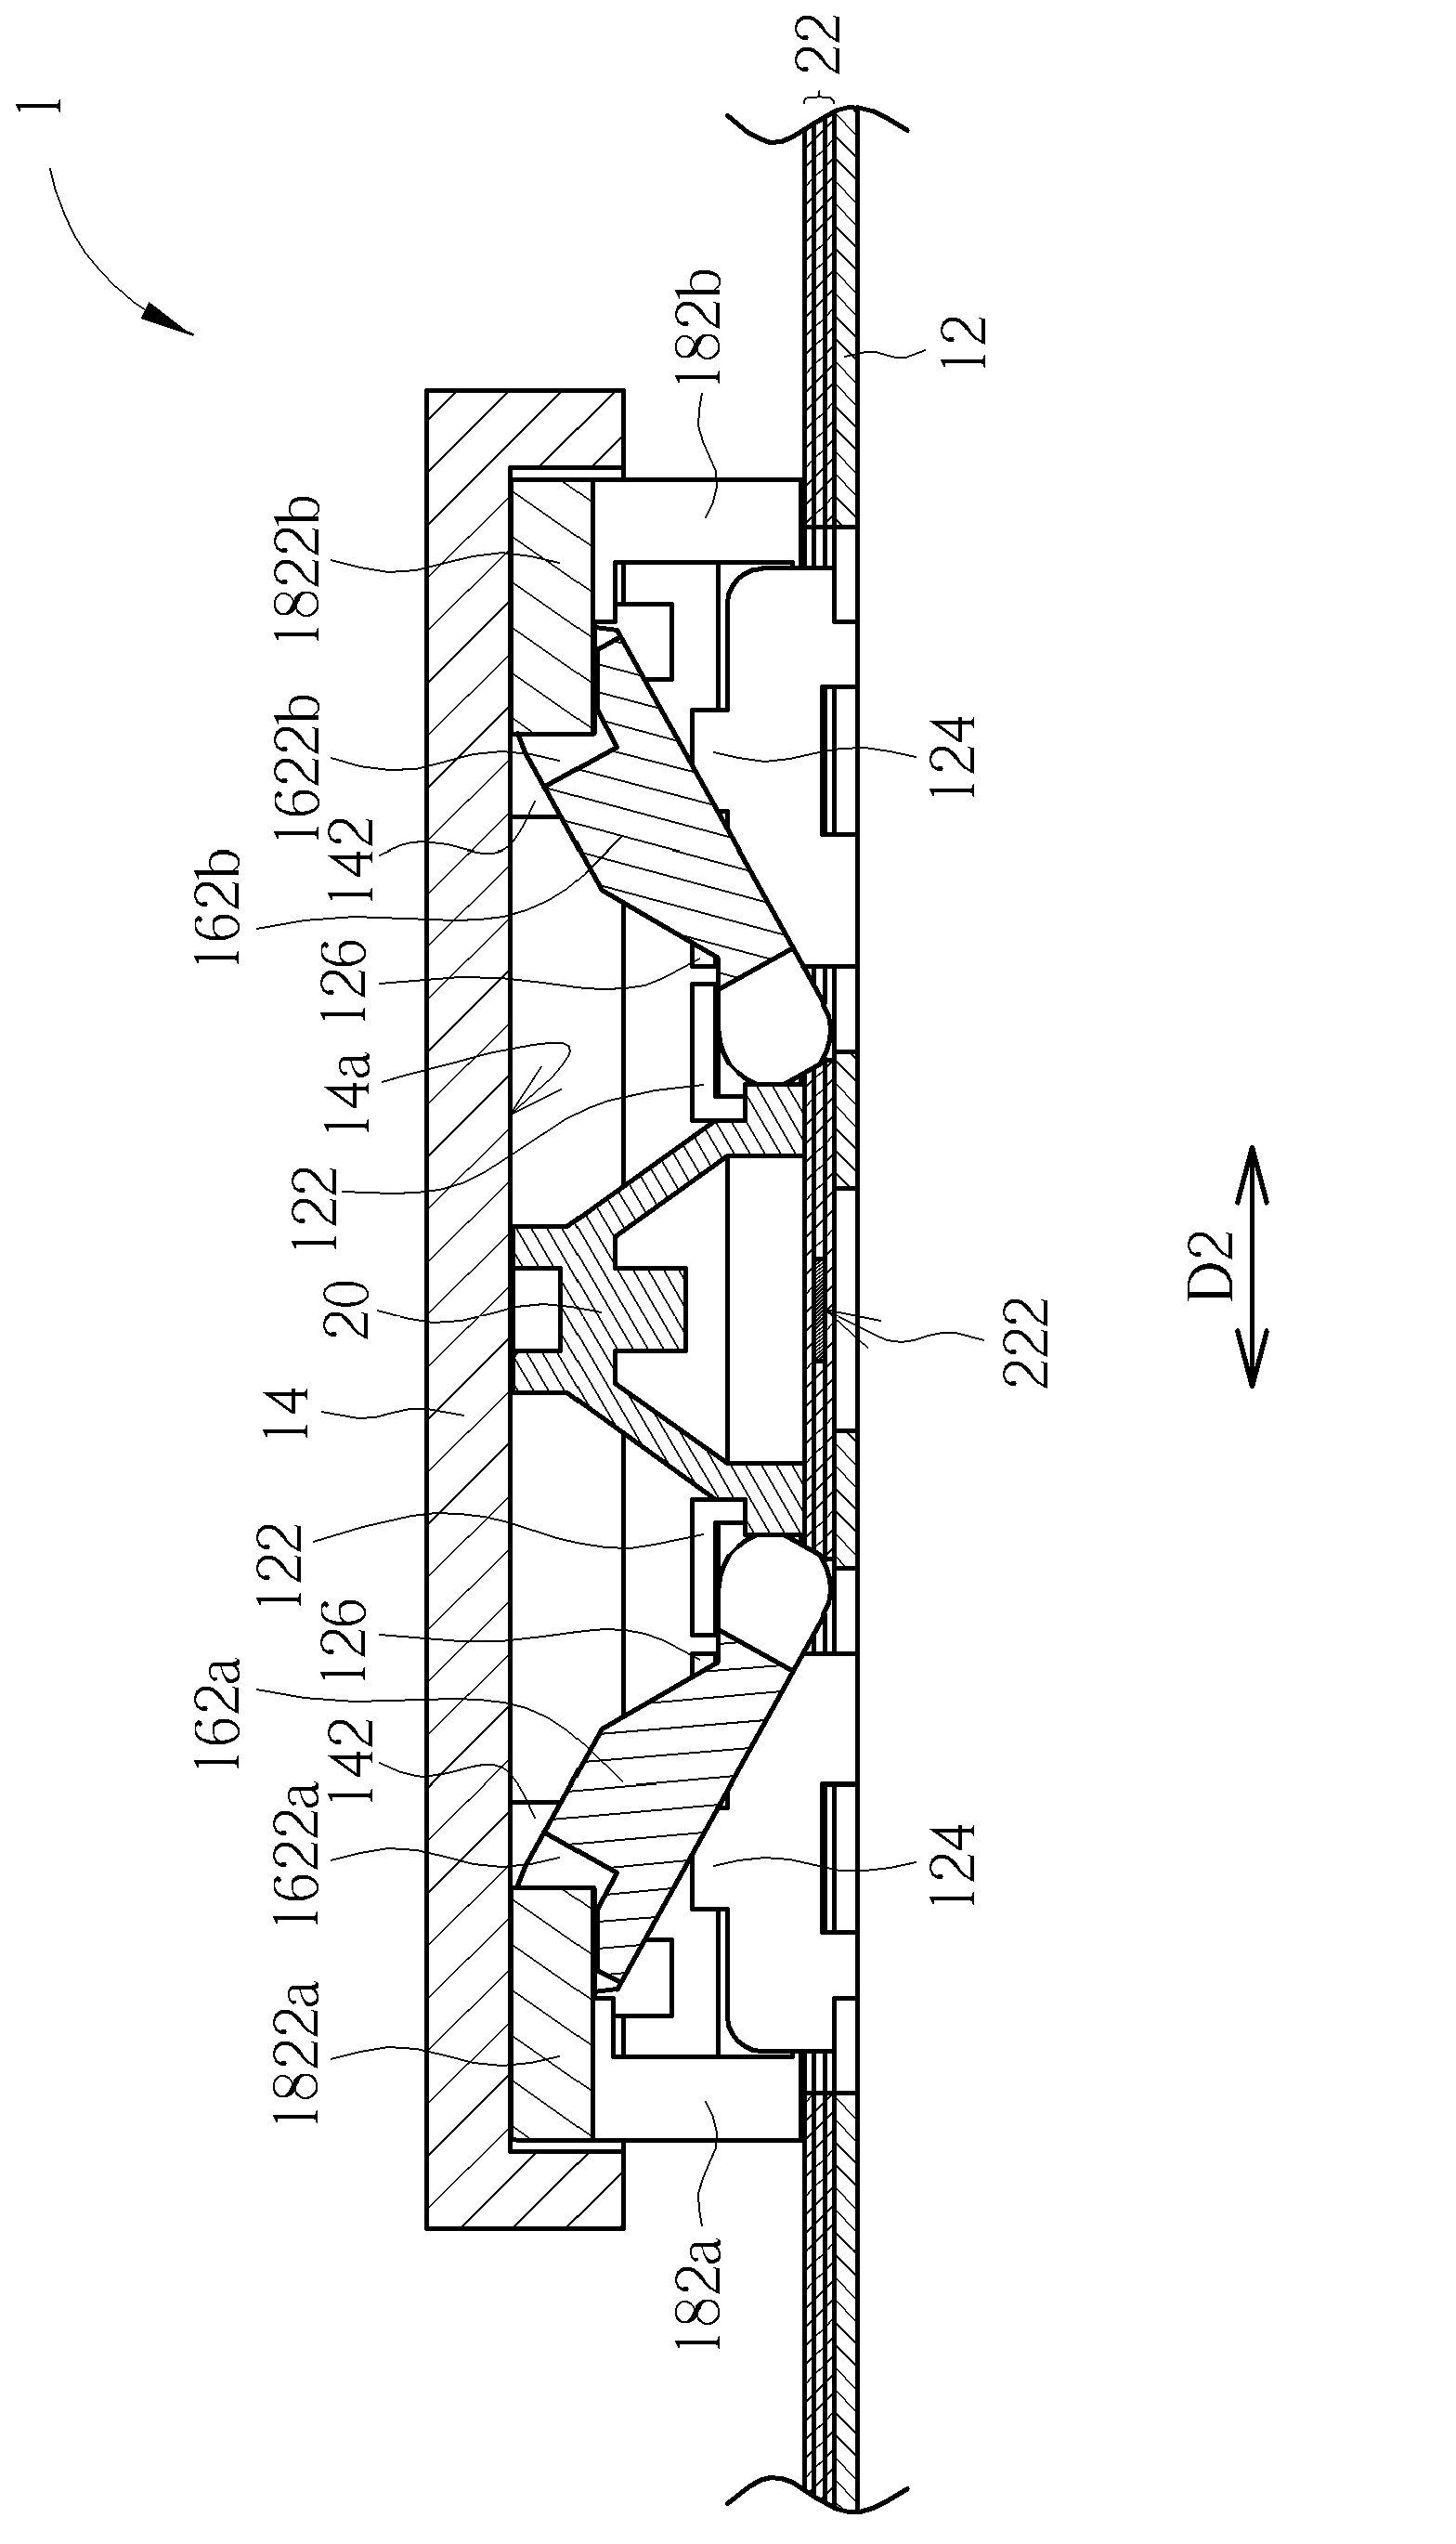 Press key structure and balance rod thereof